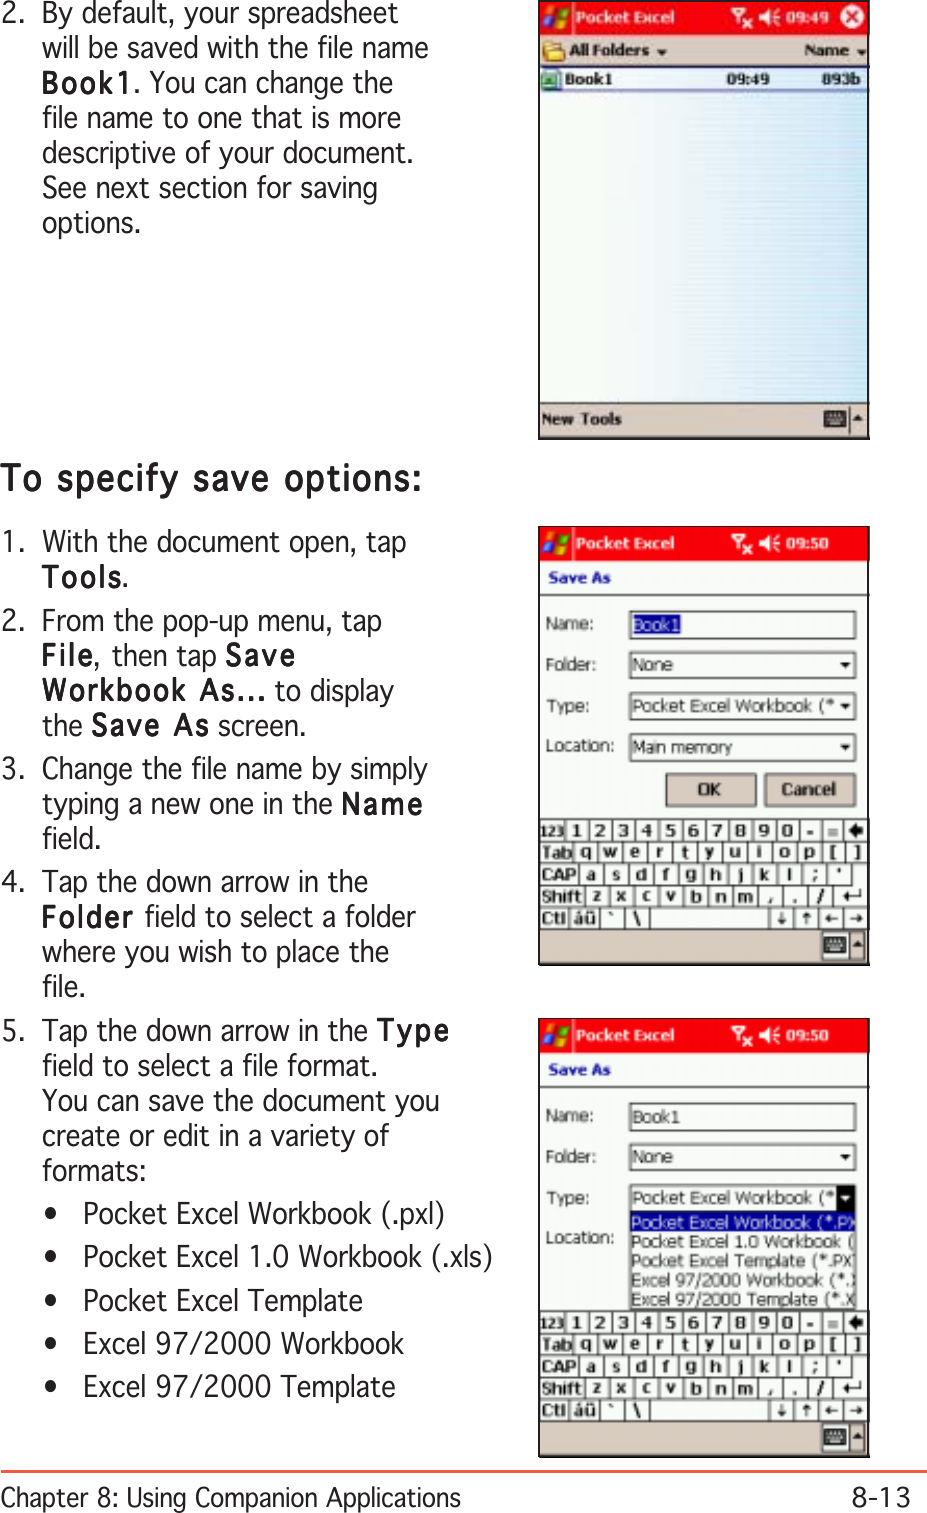 Chapter 8: Using Companion Applications8-13To specify save options:To specify save options:To specify save options:To specify save options:To specify save options:1. With the document open, tapToolsToolsToolsToolsTools.2. From the pop-up menu, tapFileFileFileFileF il e, then tap SaveSaveSaveSaveSaveWorkbook As...Workbook As...Workbook As...Workbook As...Workbook As... to displaythe Save AsSave AsSave AsSave AsSave As screen.3. Change the file name by simplytyping a new one in the NameNameNameNameNamefield.4. Tap the down arrow in theFolderFolderFolderFolderFolder field to select a folderwhere you wish to place thefile.5. Tap the down arrow in the TypeTypeTypeTypeTypefield to select a file format.You can save the document youcreate or edit in a variety offormats:• Pocket Excel Workbook (.pxl)• Pocket Excel 1.0 Workbook (.xls)• Pocket Excel Template• Excel 97/2000 Workbook• Excel 97/2000 Template2. By default, your spreadsheetwill be saved with the file nameBook1Book1Book1Book1Bo ok 1. You can change thefile name to one that is moredescriptive of your document.See next section for savingoptions.